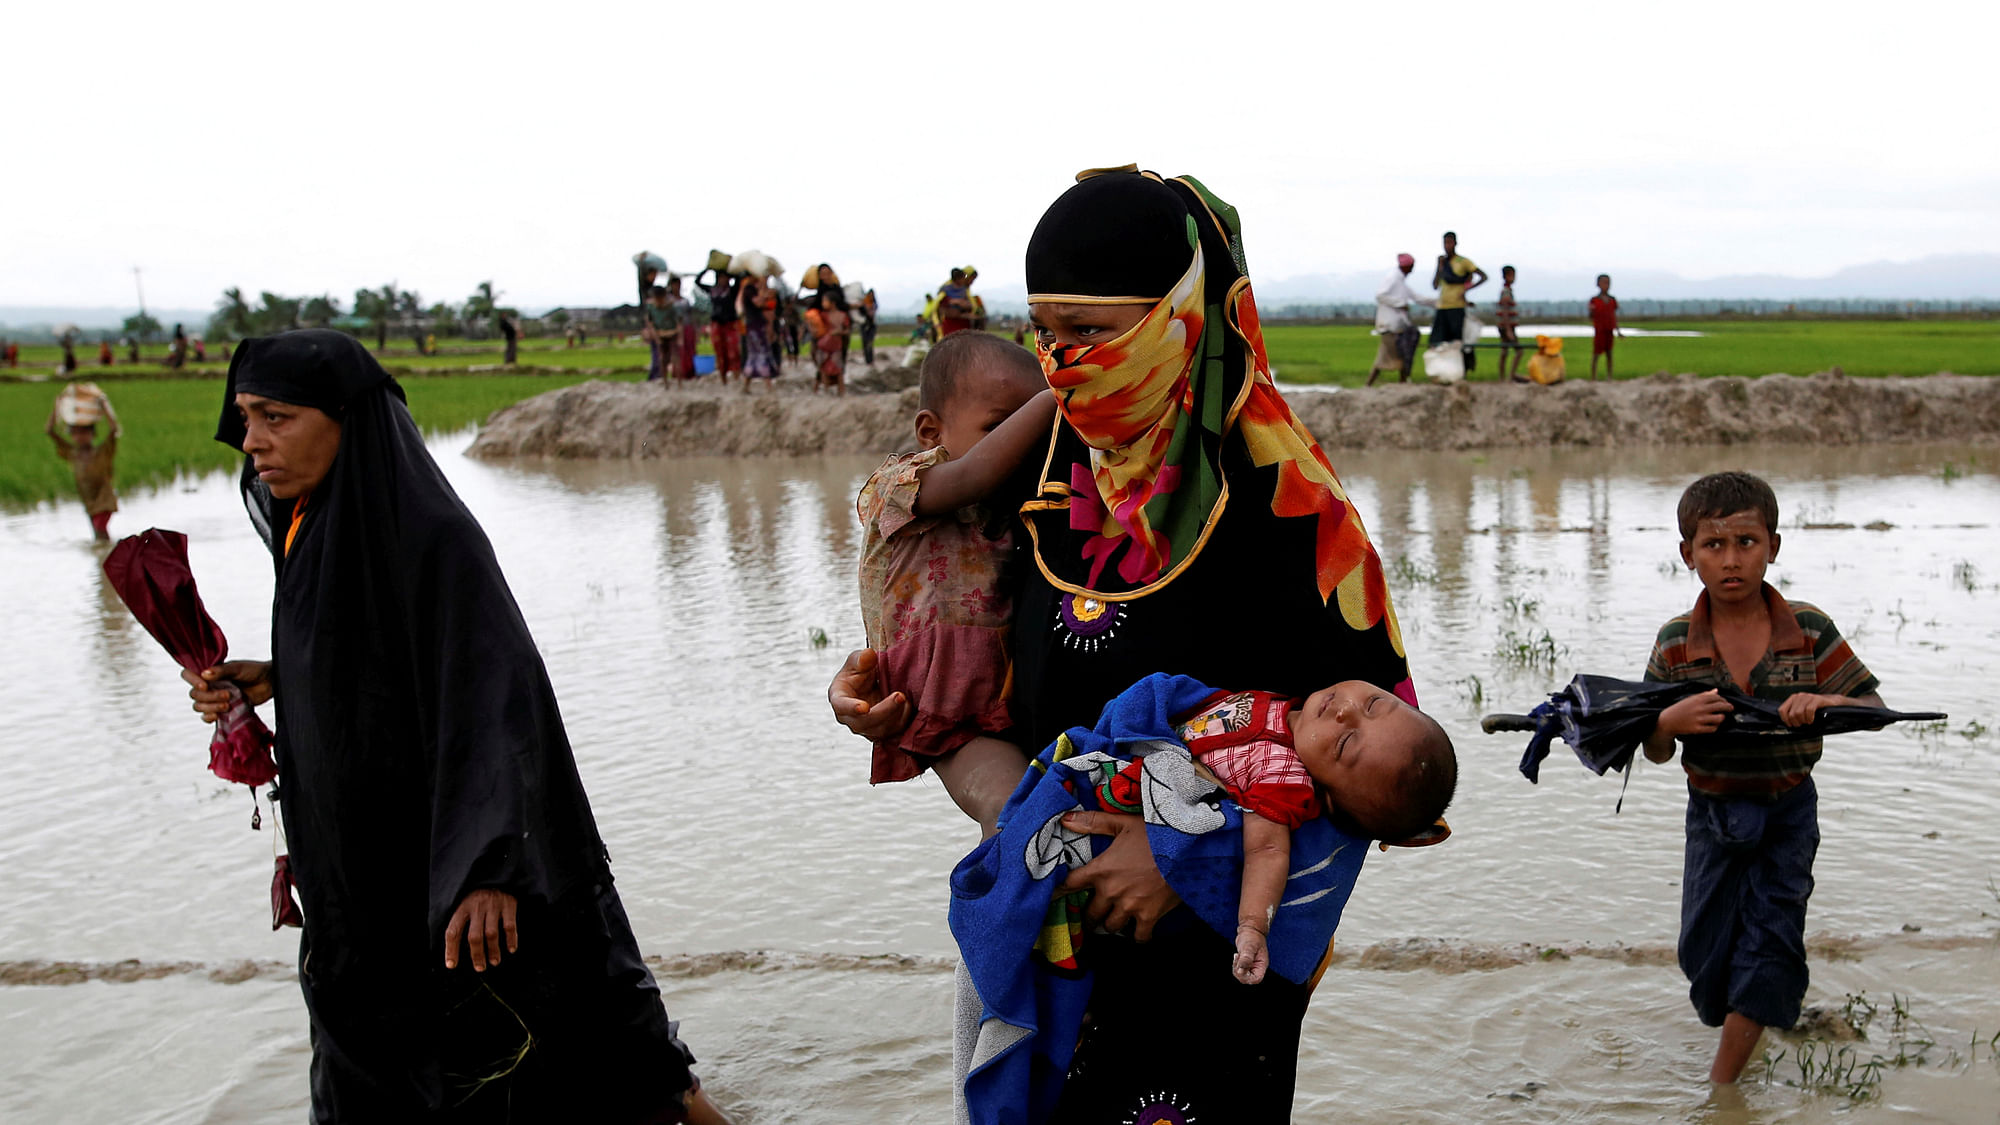 A Rohingya refugee woman carry children while walking in the water after travelling over the Bangladesh-Myanmar border in Teknaf, Bangladesh.